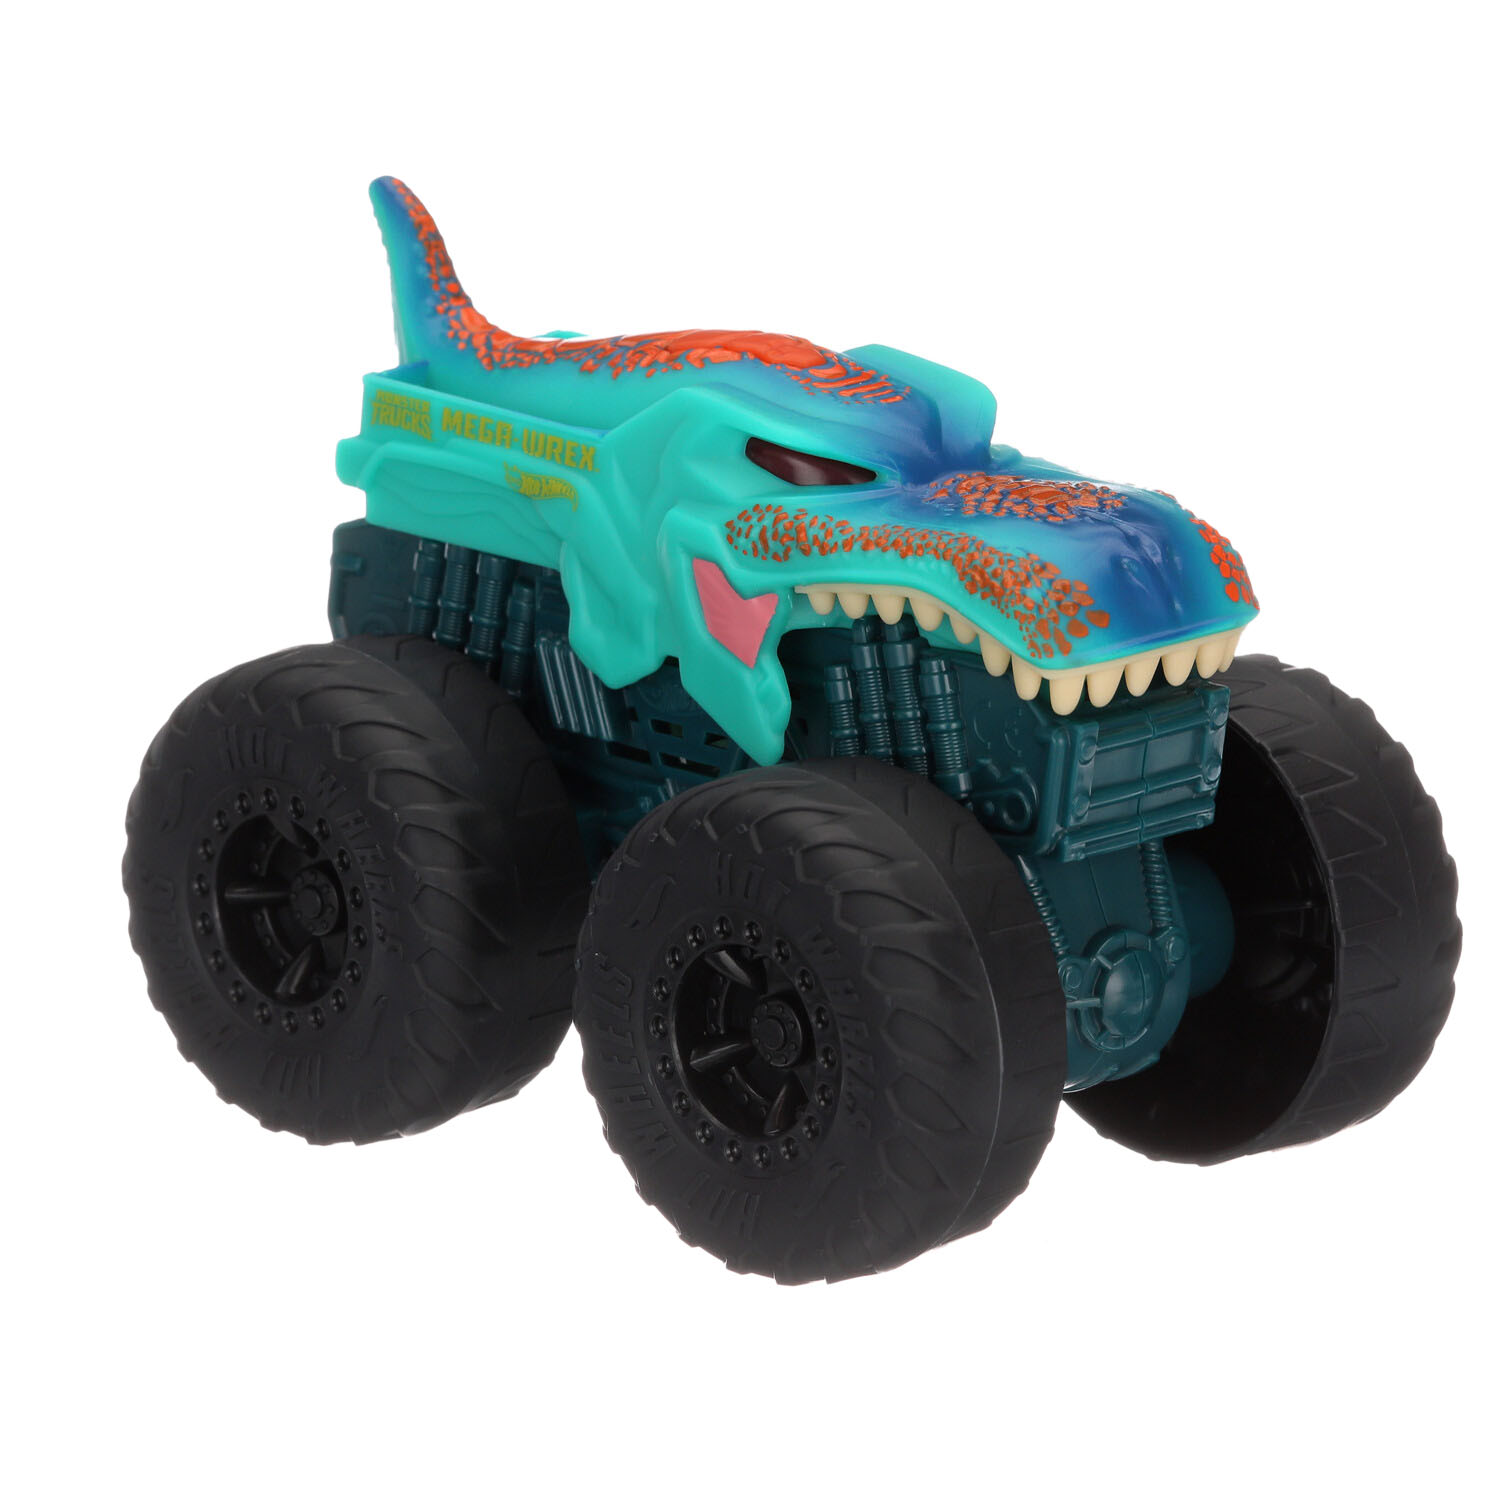  Hot Wheels RC Monster Trucks 1:6 Scale Mega-Wrex, Large  Remote-Control Toy Truck, All-Terrain Tires, 2ft+ Long : Toys & Games